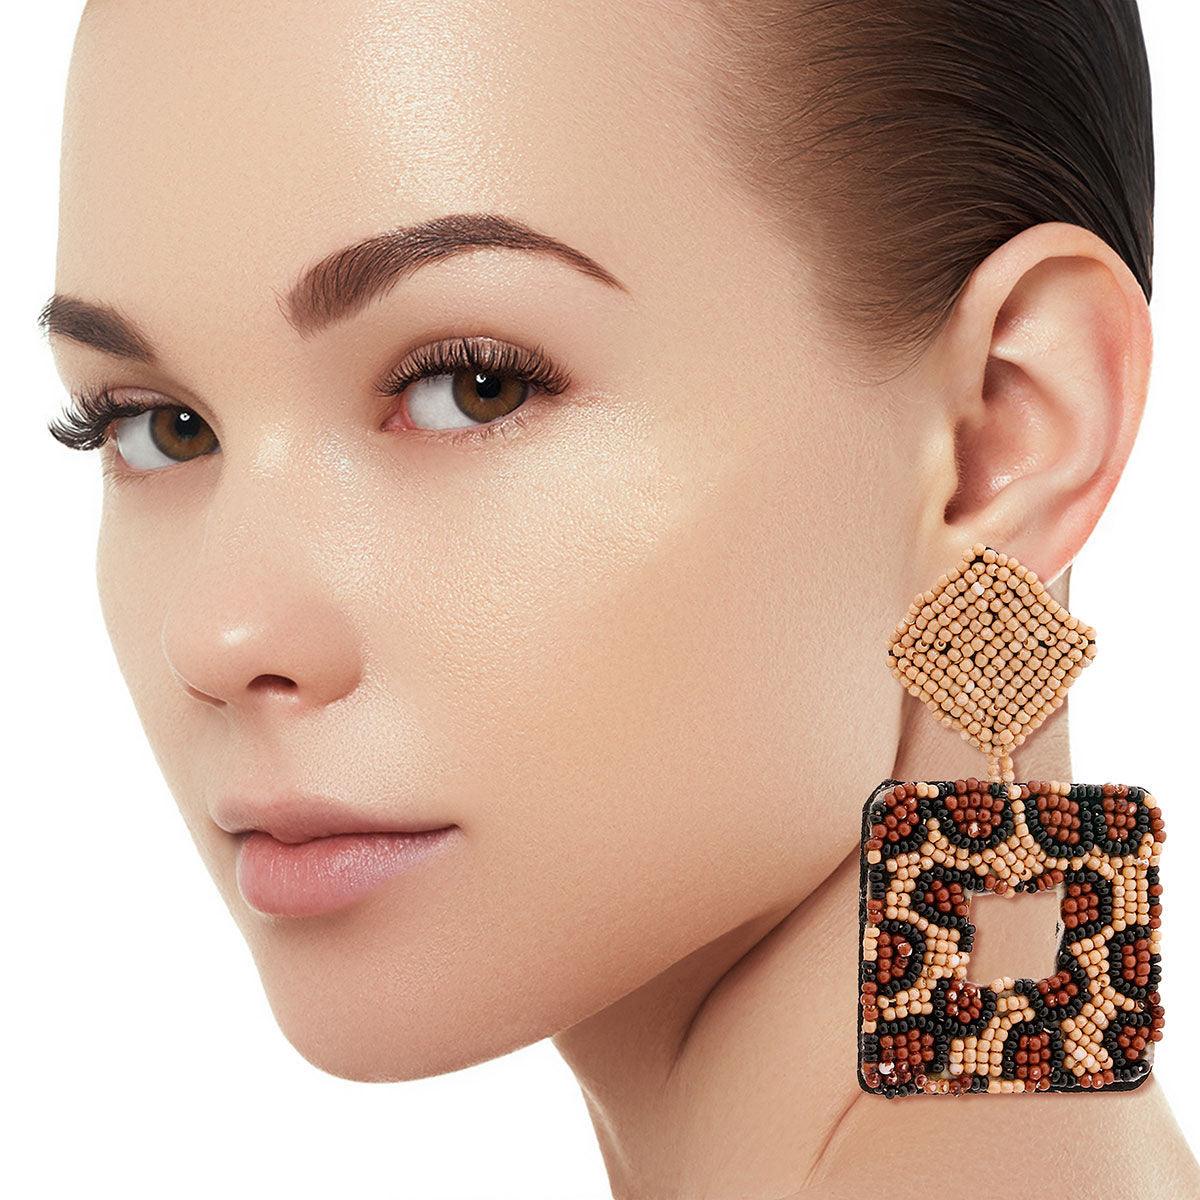 Shop Now for the Trendiest Leopard Beaded Square Earrings